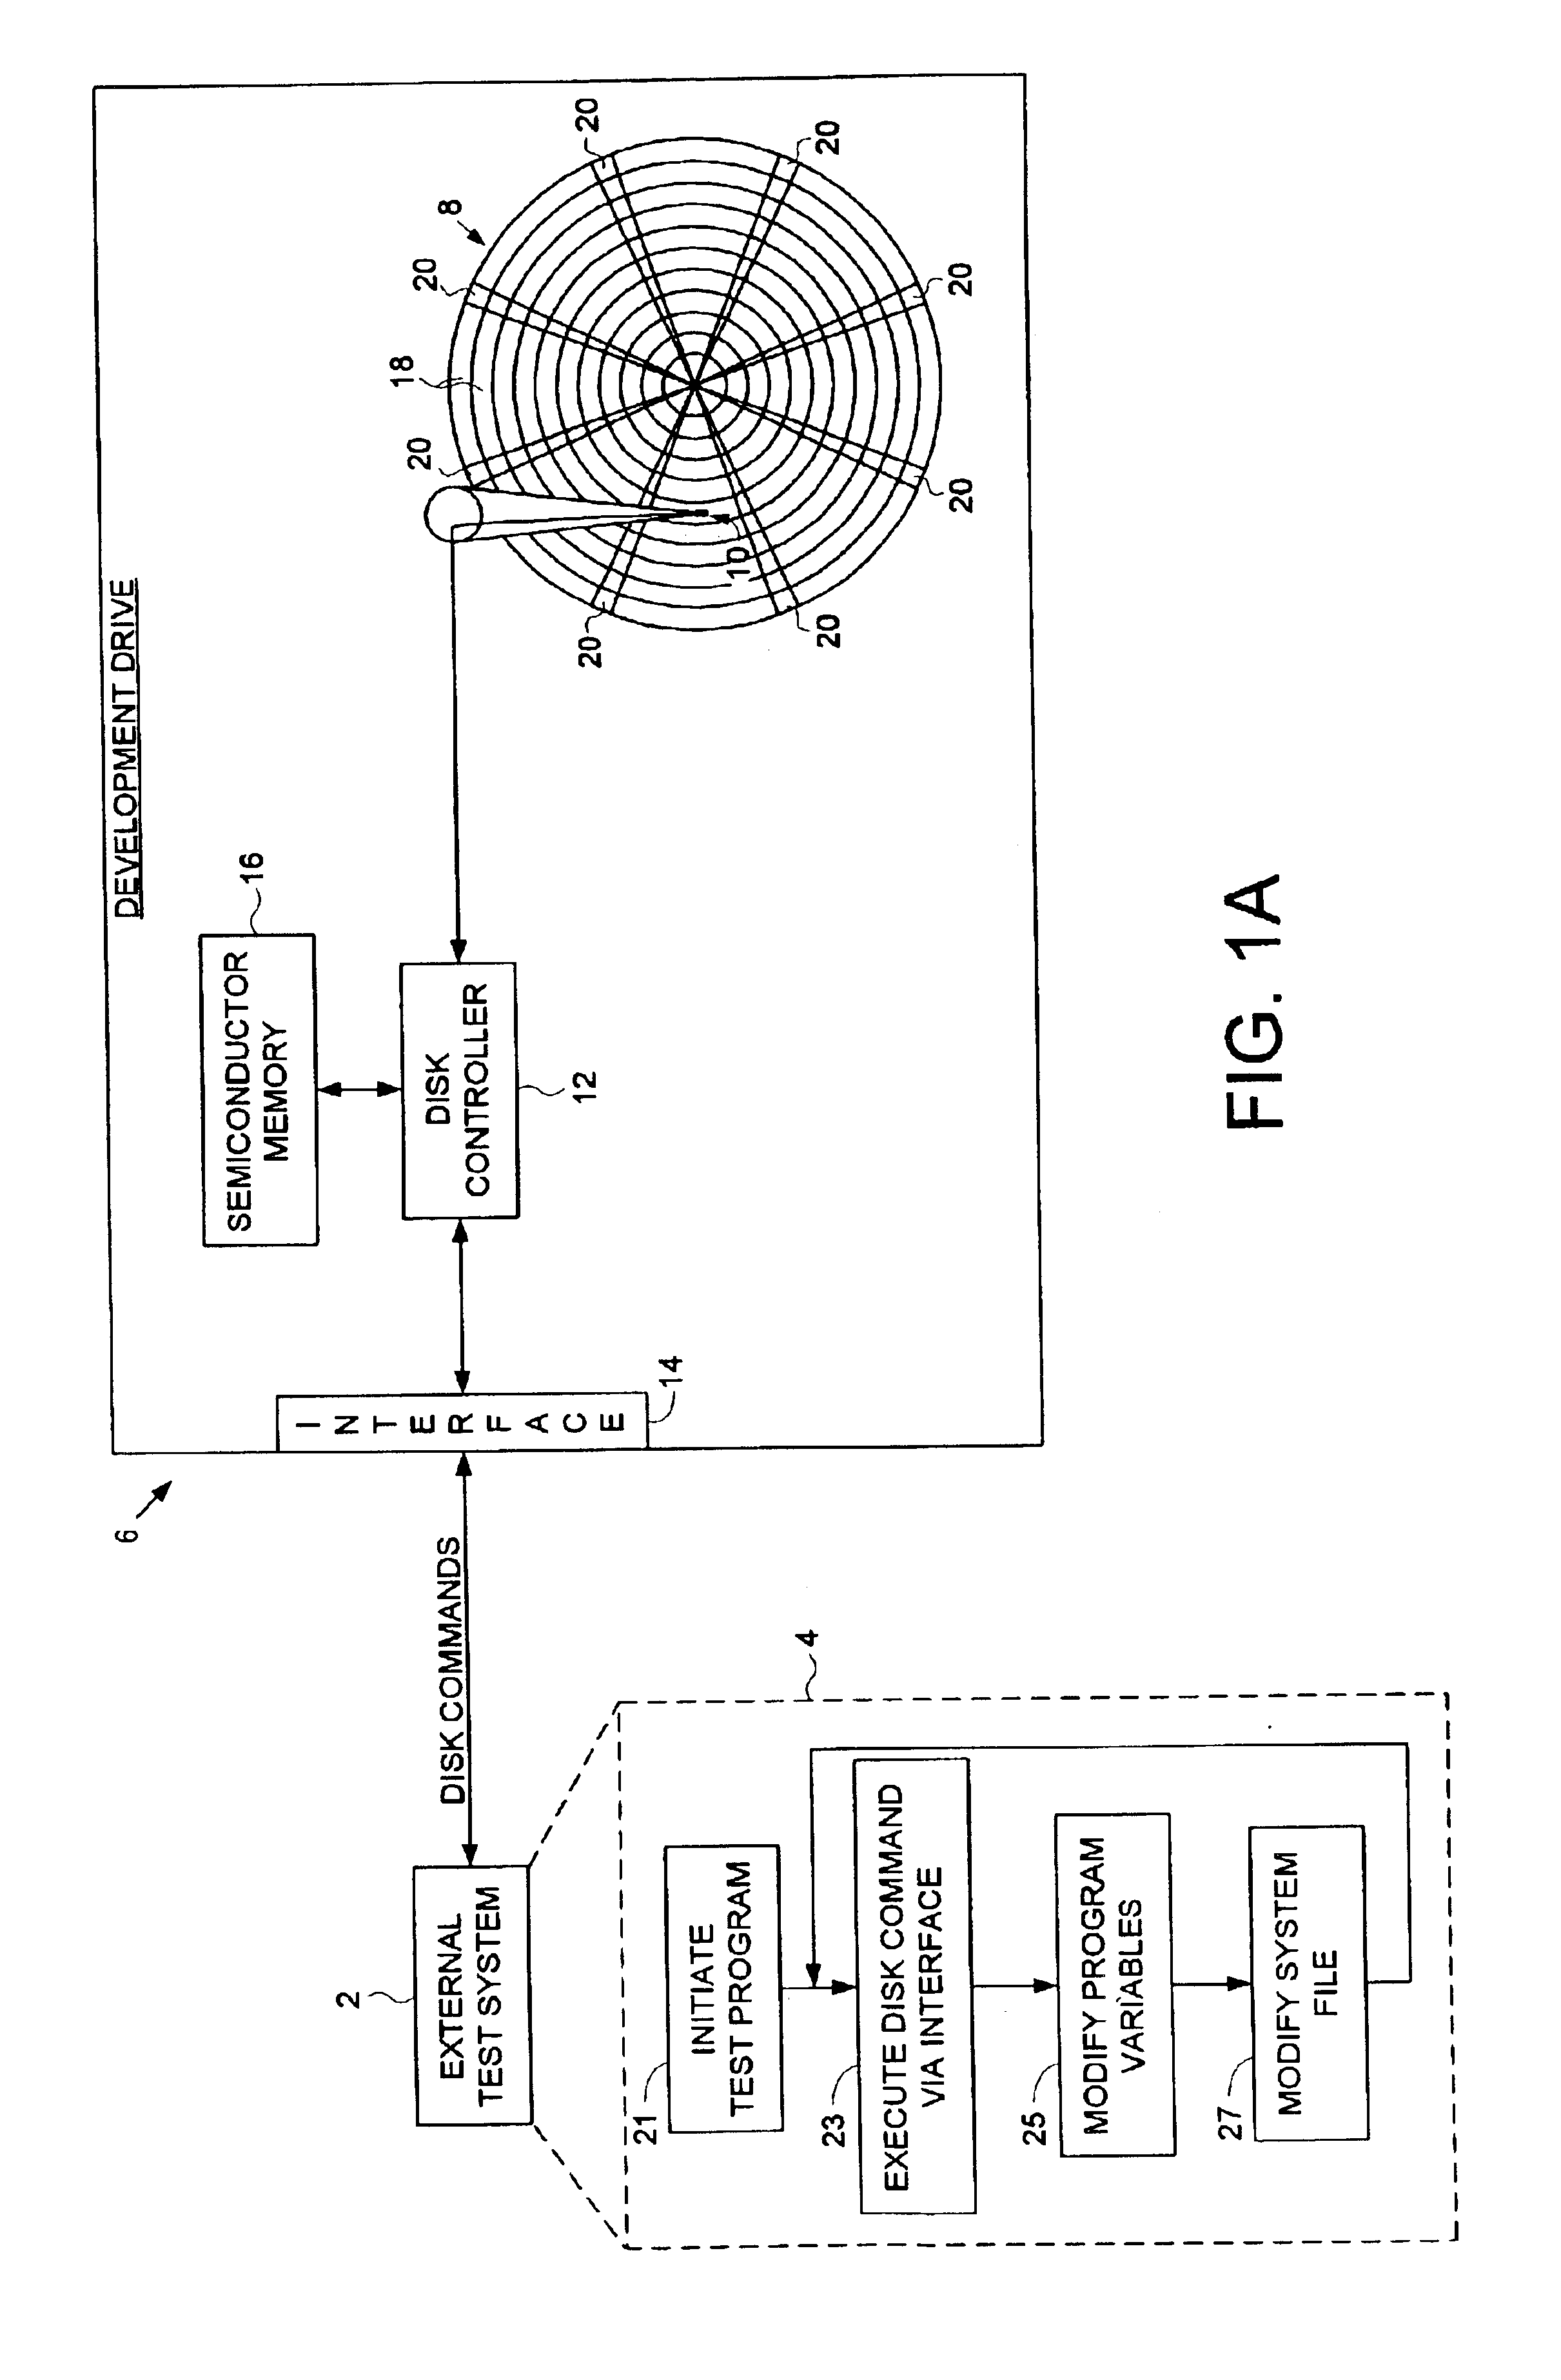 Disk drive executing a manufacturing program internally by executing disk commands through a vector